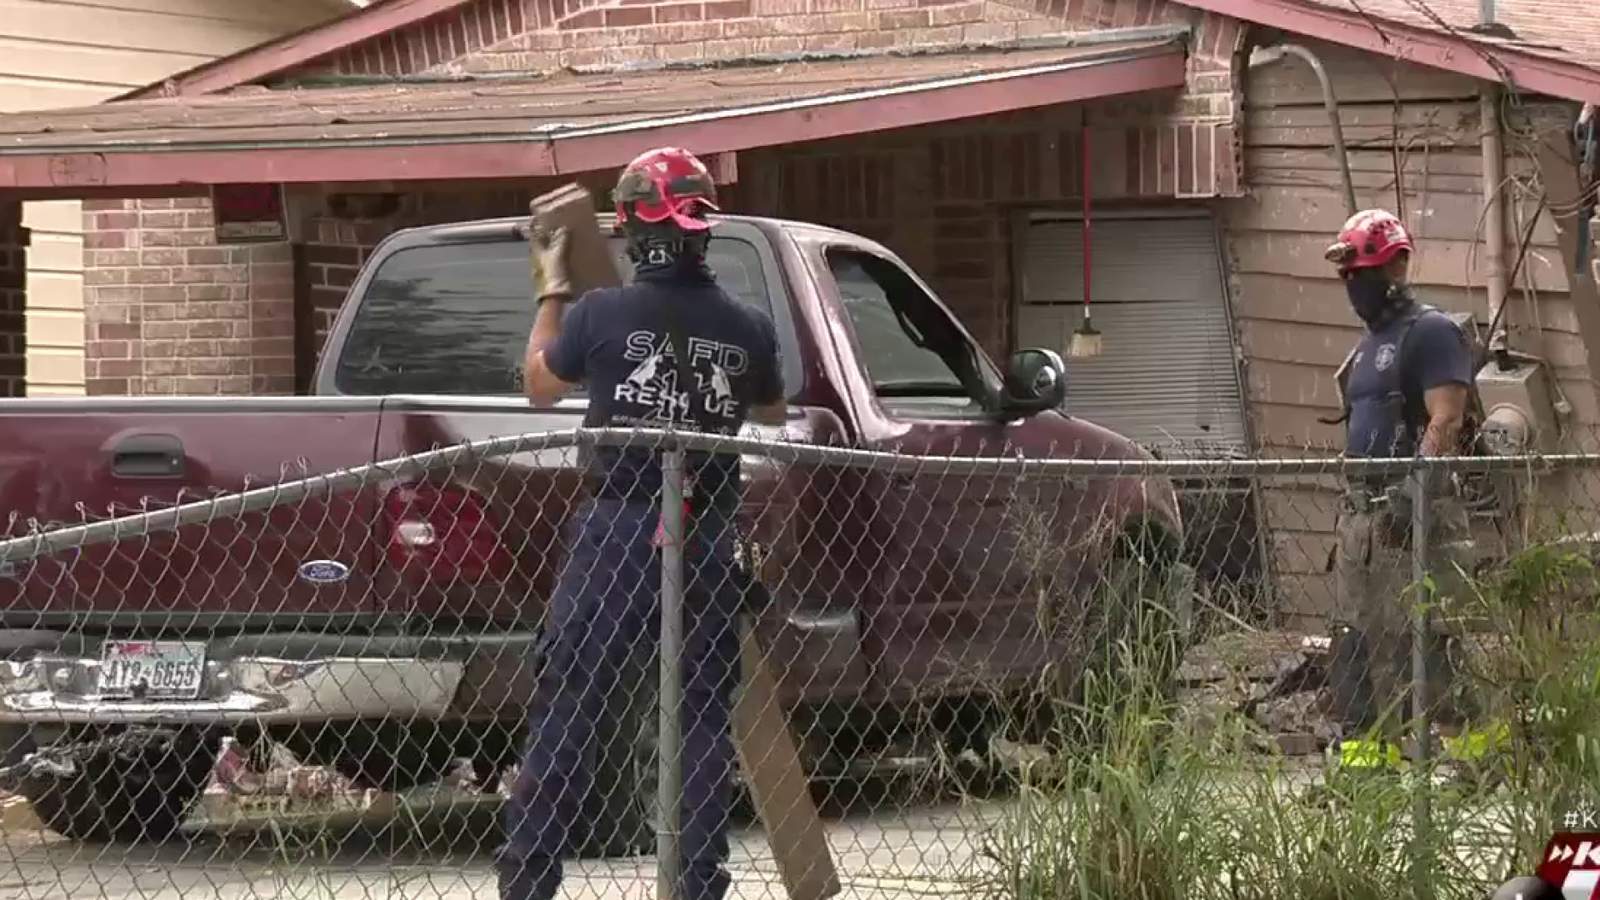 ‘Have a happy Thanksgiving,’: Couple says to man who allegedly destroyed their home with his truck